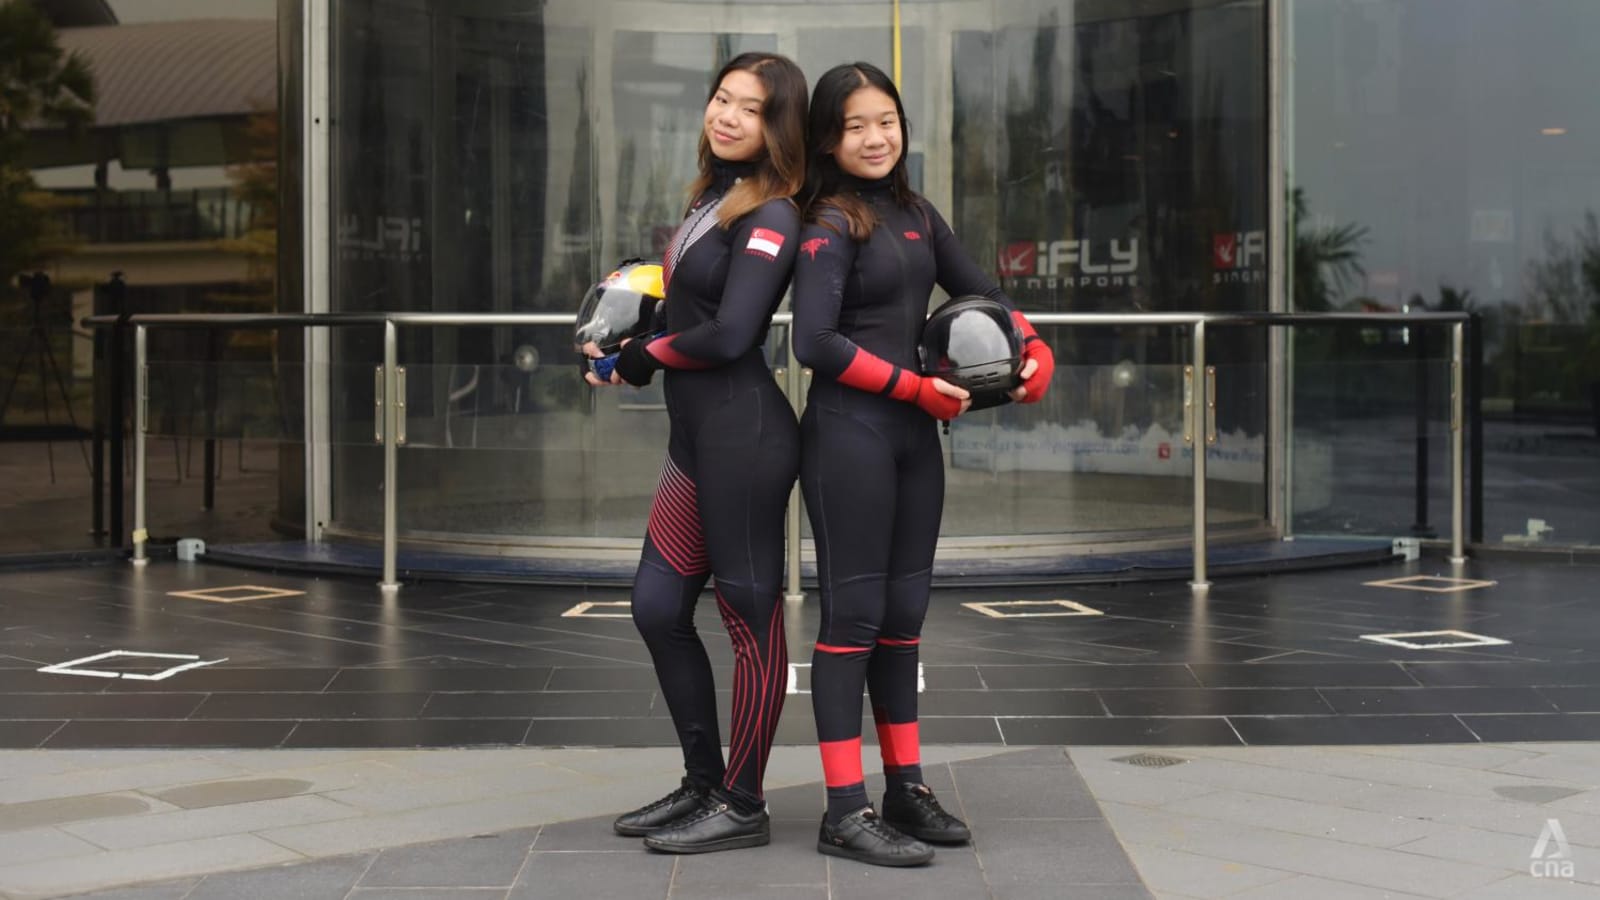 indoor-skydiving-world-champ-kyra-poh-on-flying-high-with-sister-vera:-‘one-day,-she-will-be-better-than-me’